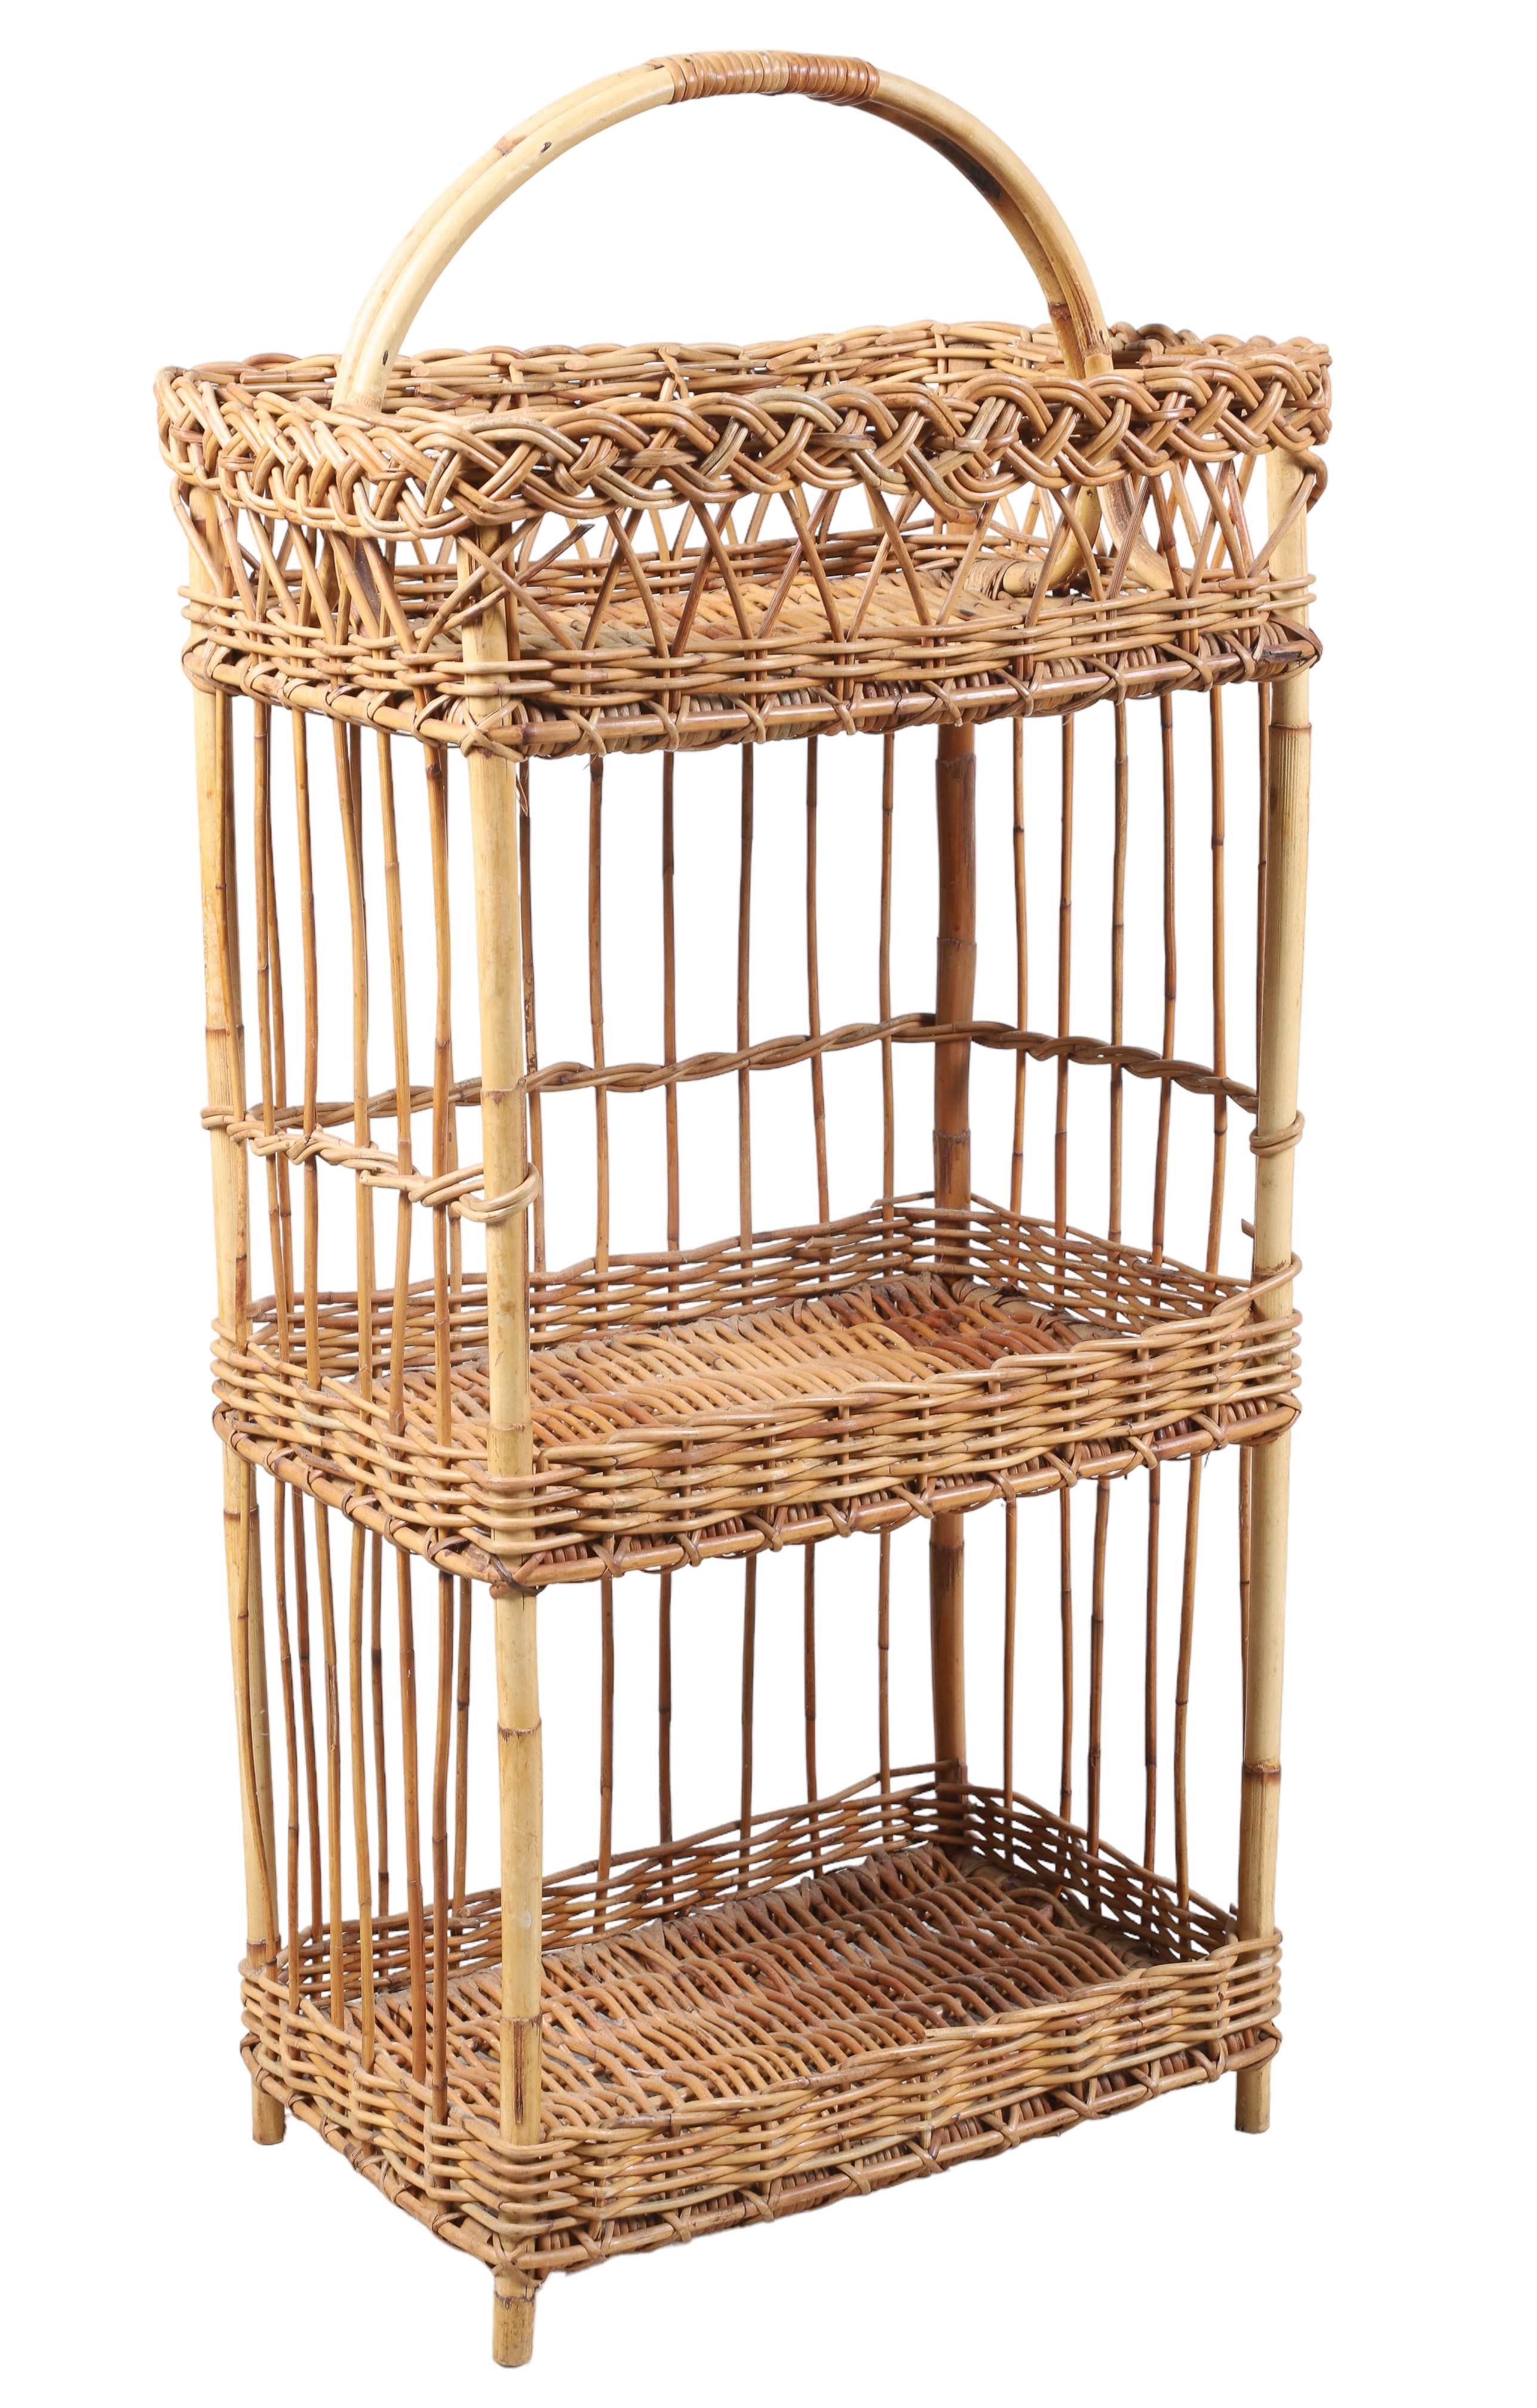 Wicker tiered stand 3 tiers 42 h 2e1dab